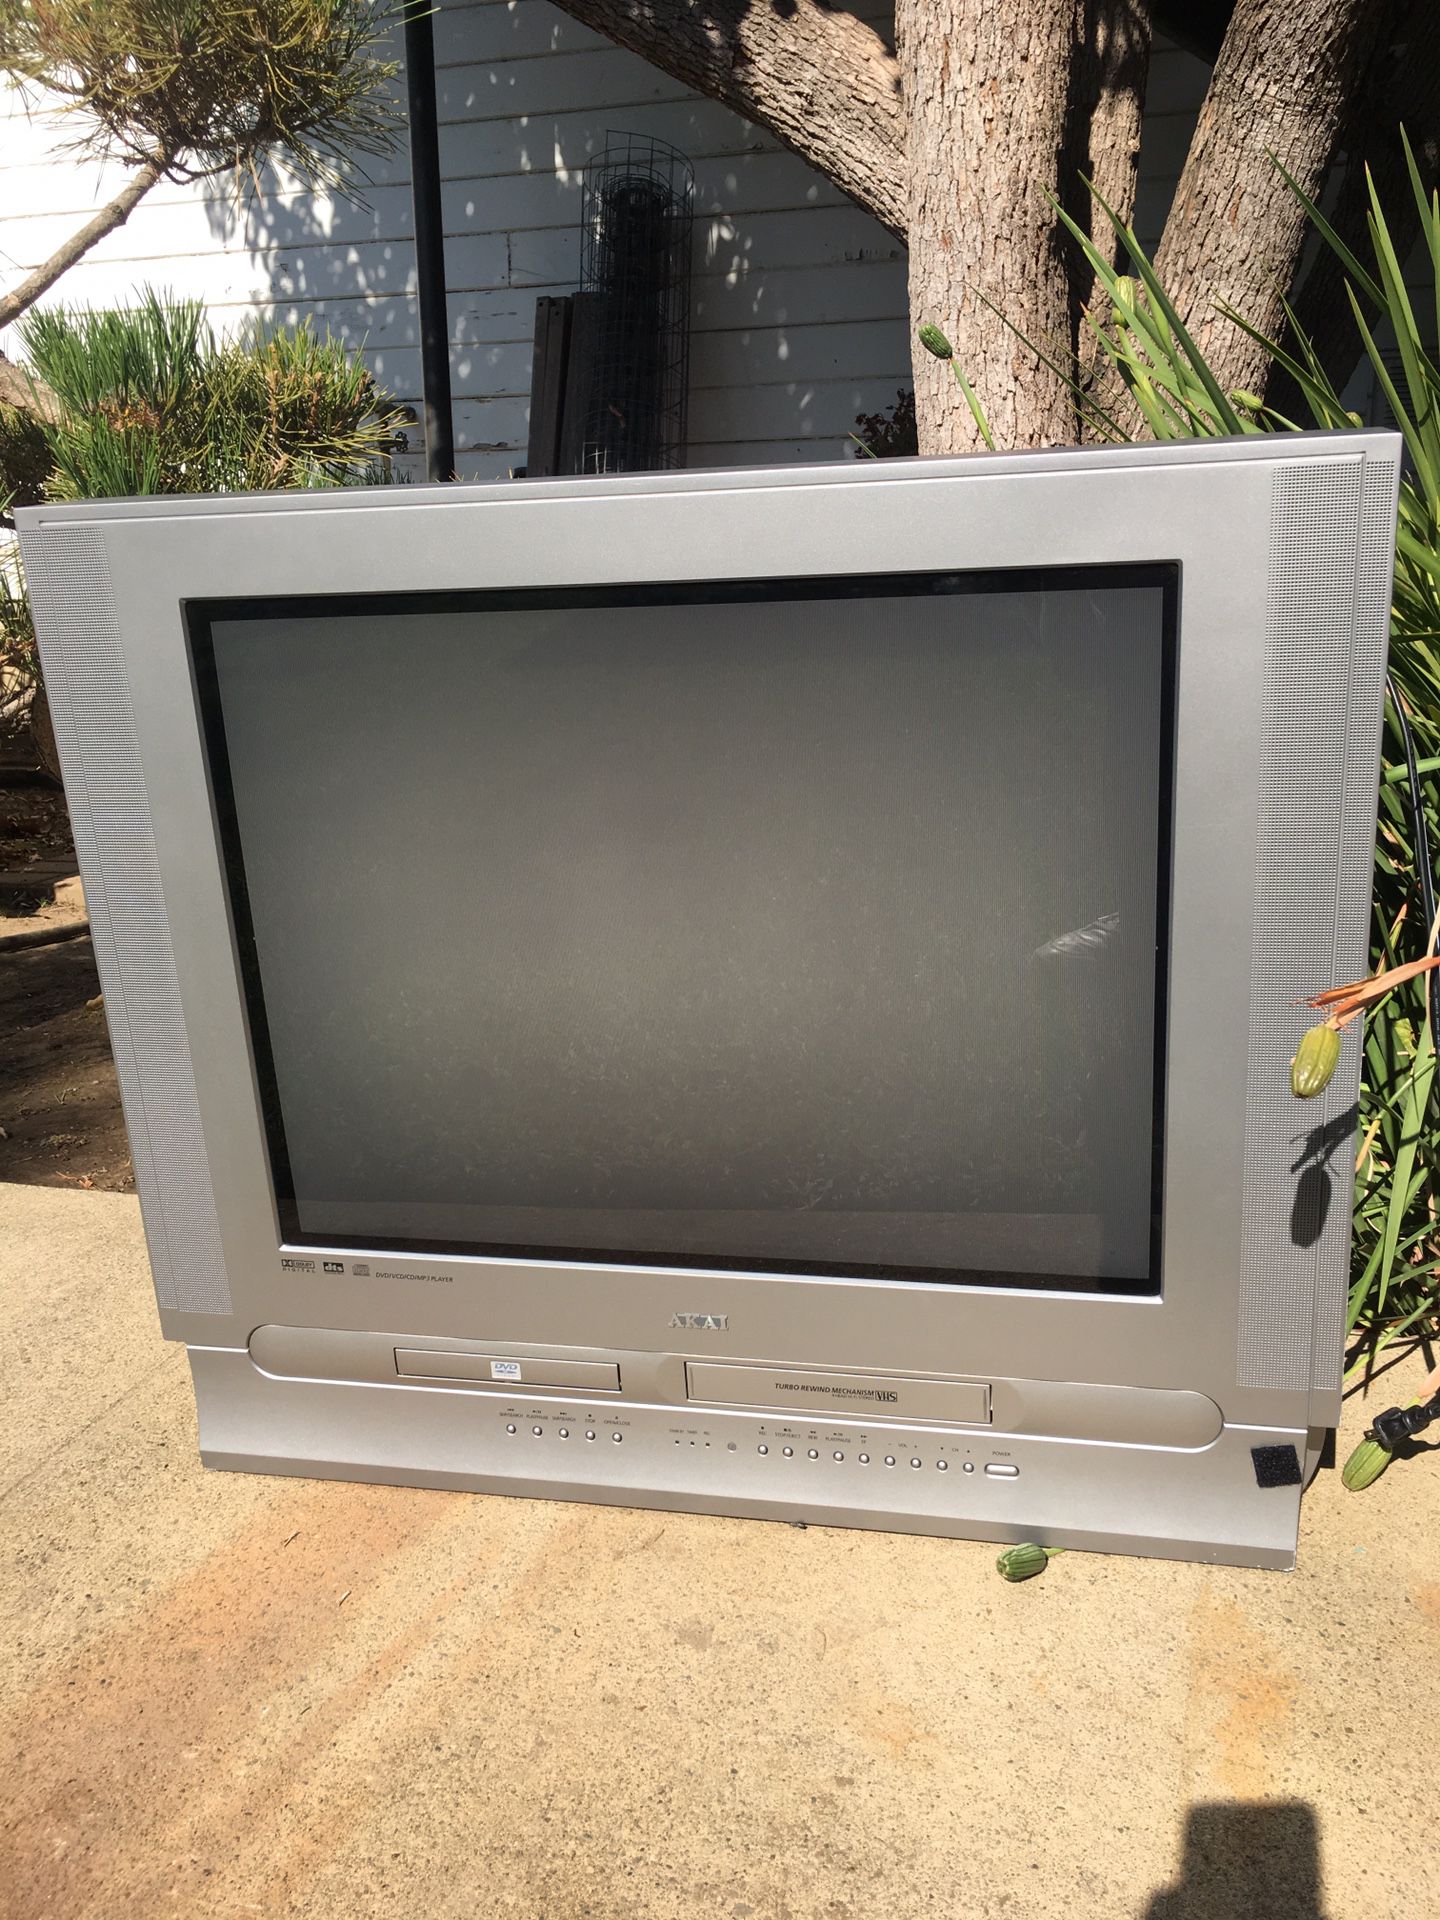 VINTAGE GAMING TV WITH BUILT IN VCR/VHS AND DVD PLAYER